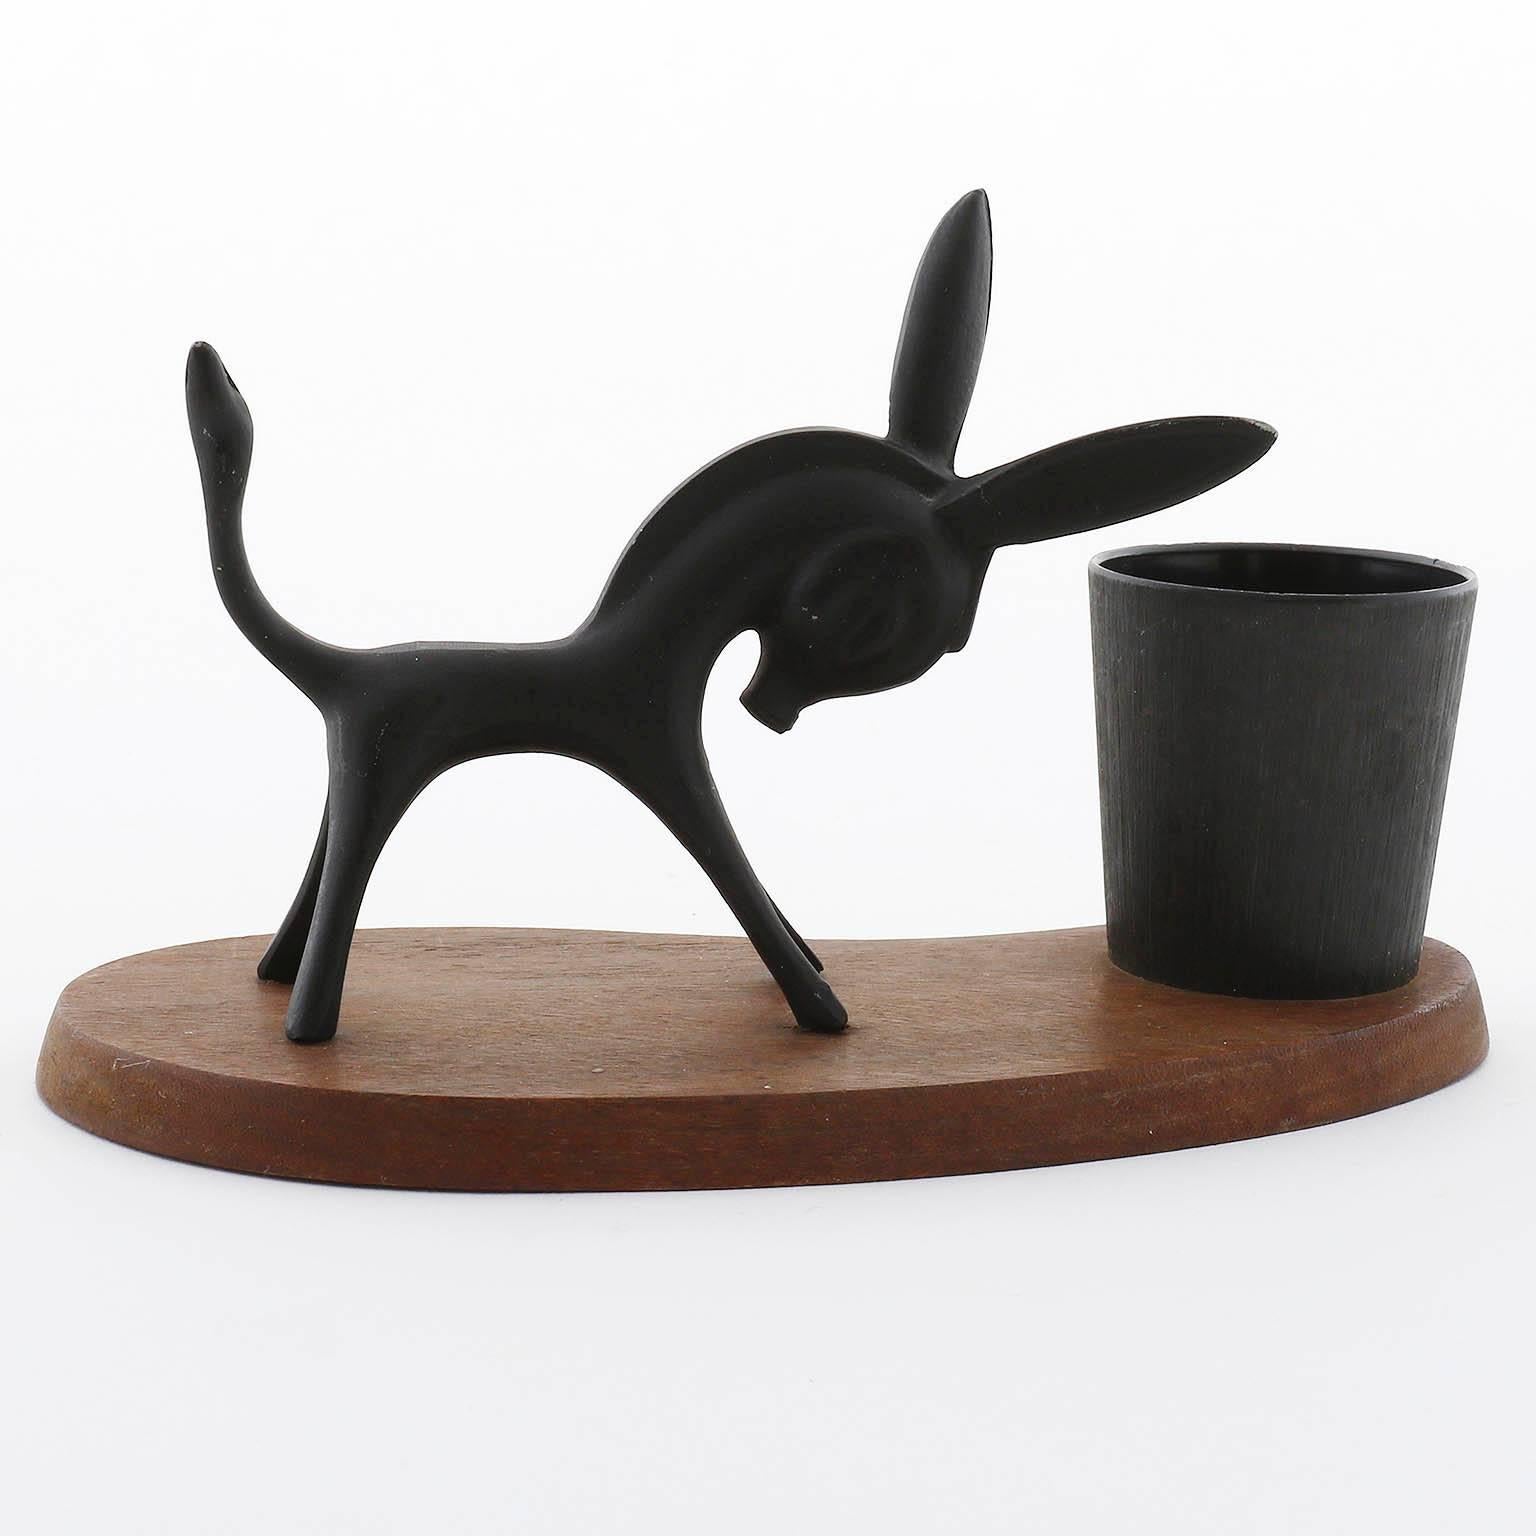 A penholder in the form of a donkey or horse by Walter Bosse, Vienna, 1950s.
It is made of blackened brass and a wooden base.